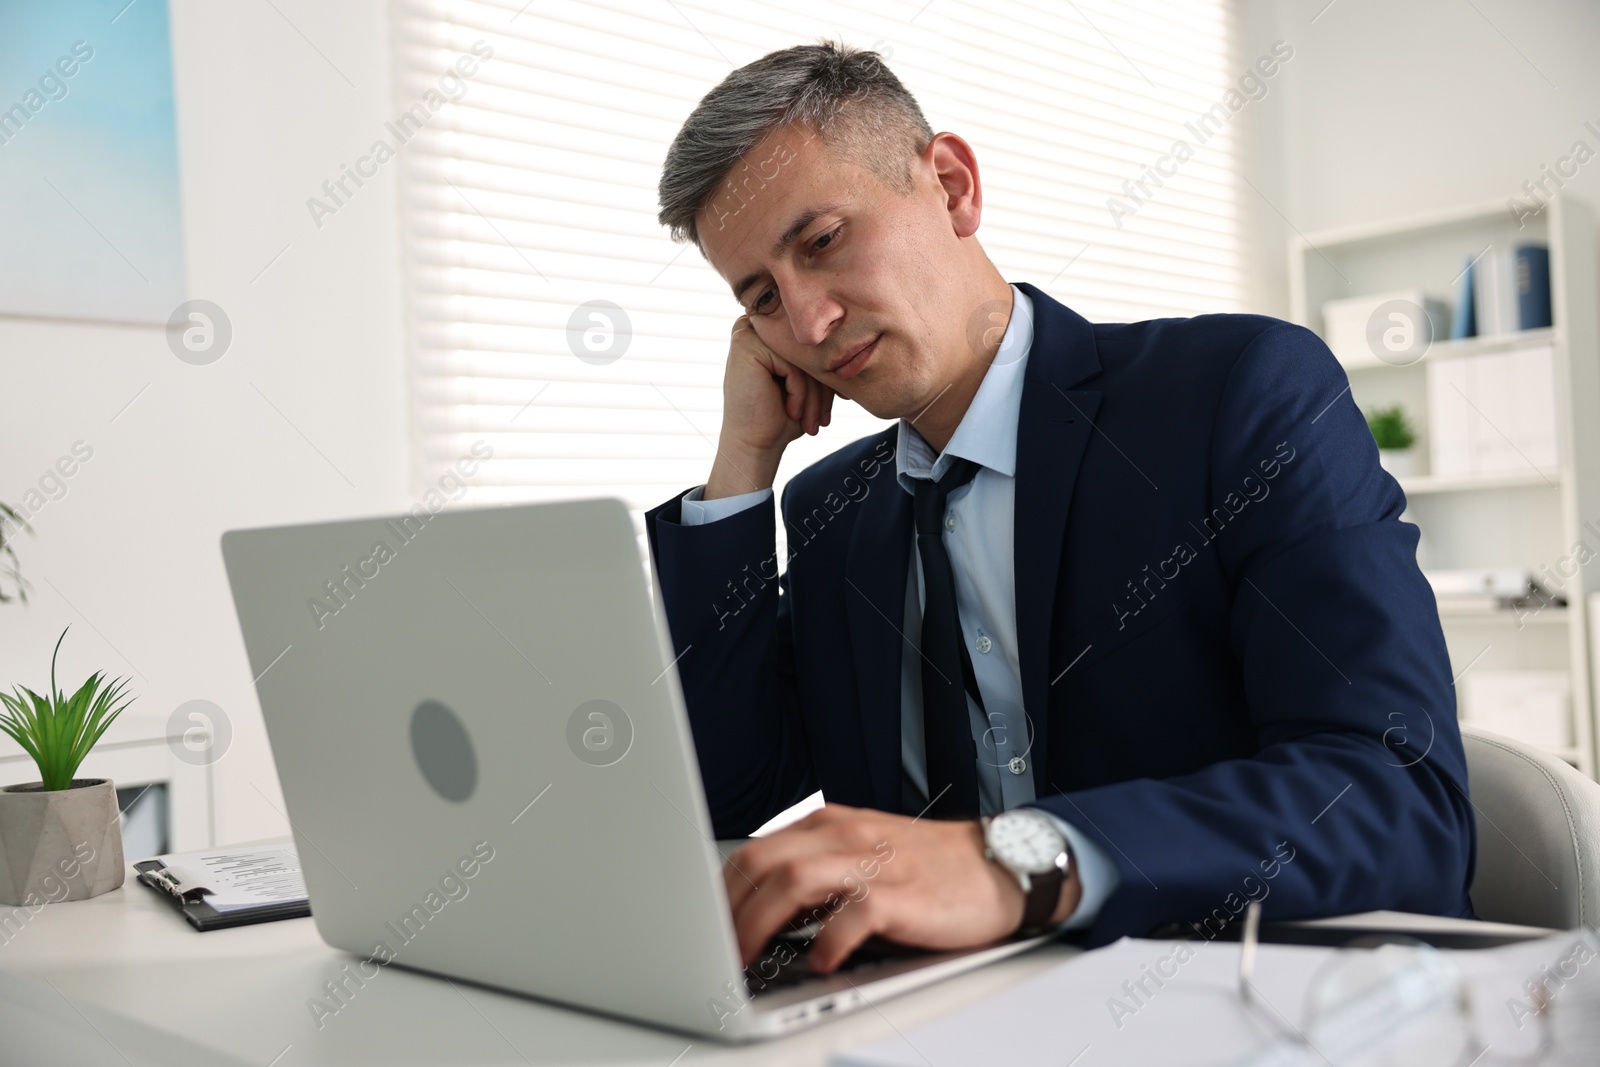 Photo of Sleepy man at table with laptop in office